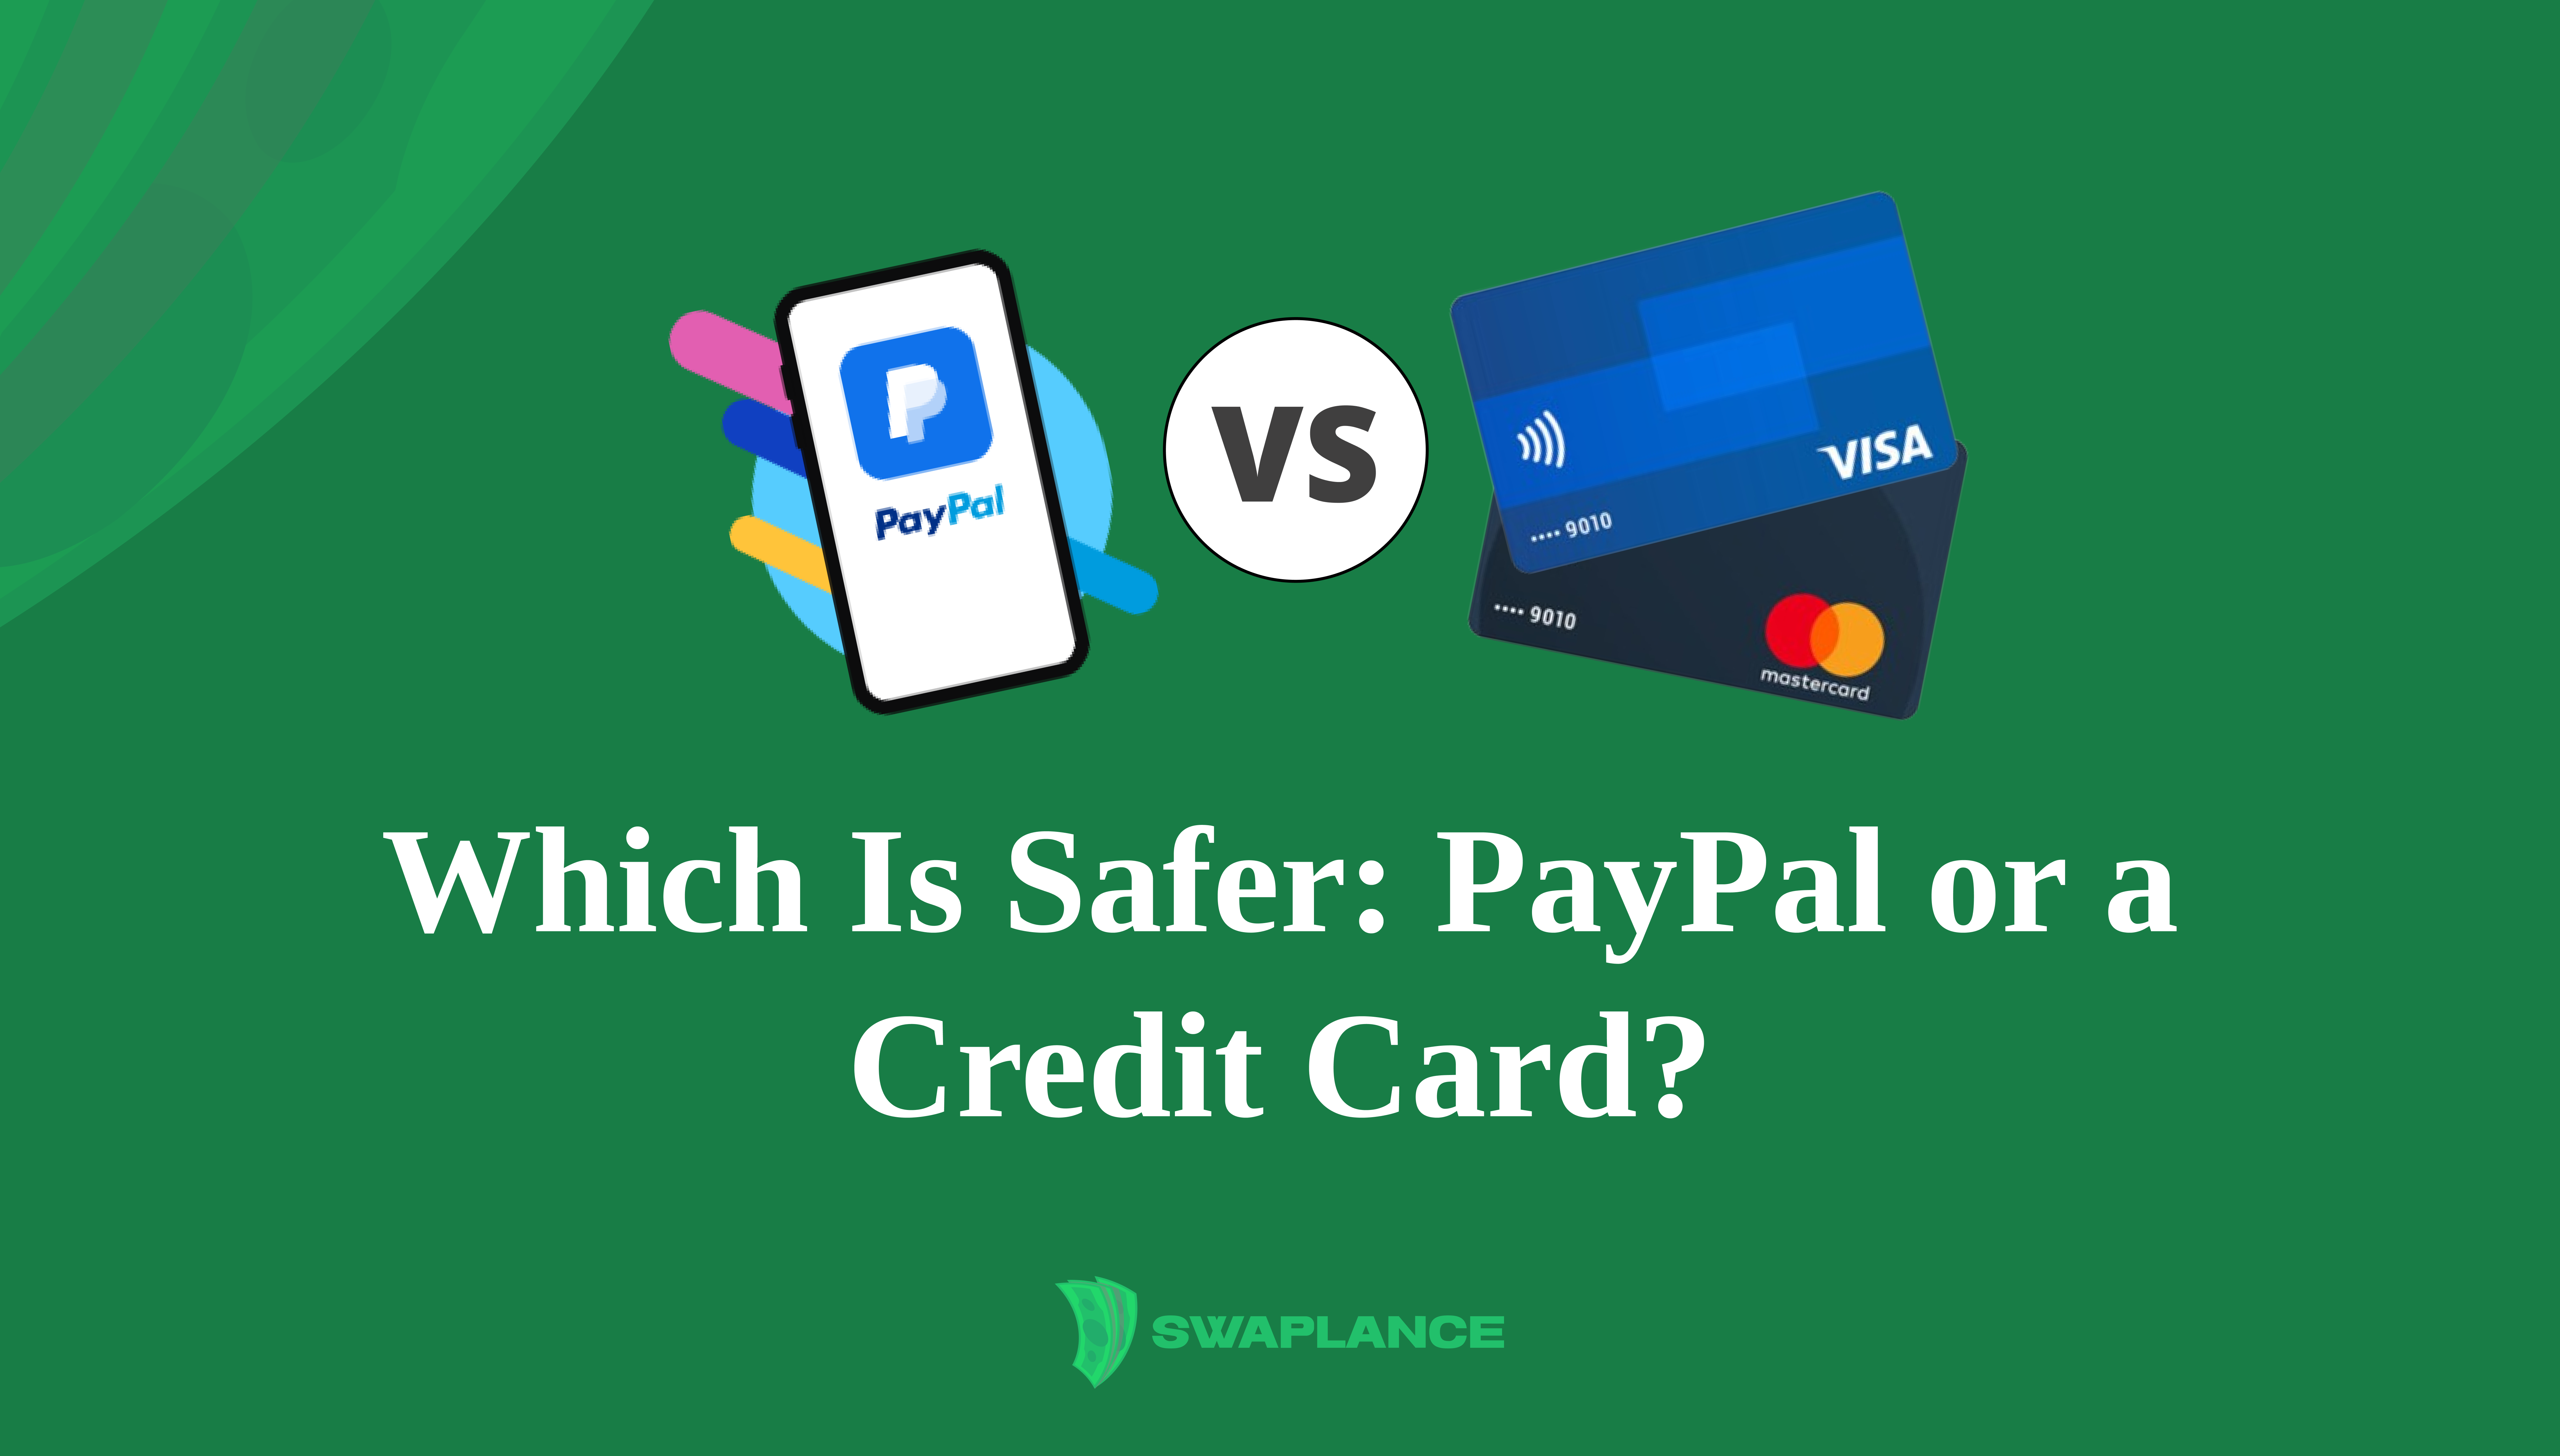 Which Is Safer: PayPal or a Credit Card?